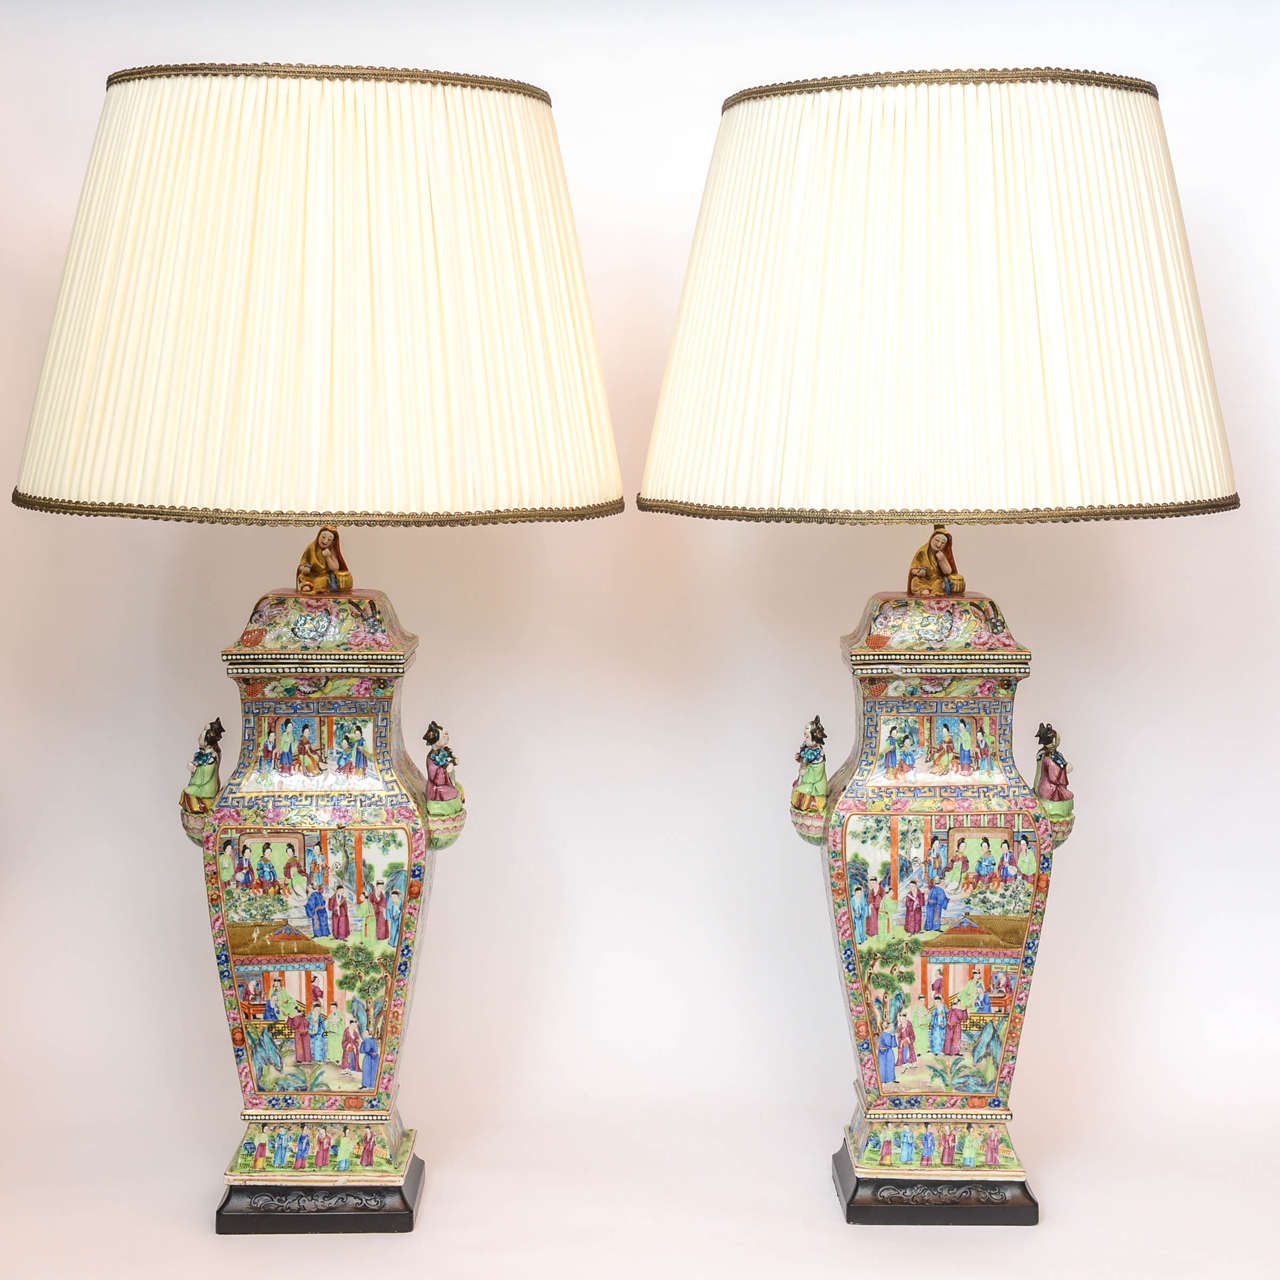 A very fine pair of Chinese canton vases with figurine handles and finals lamps, circa 1810. Measures: Height: 23